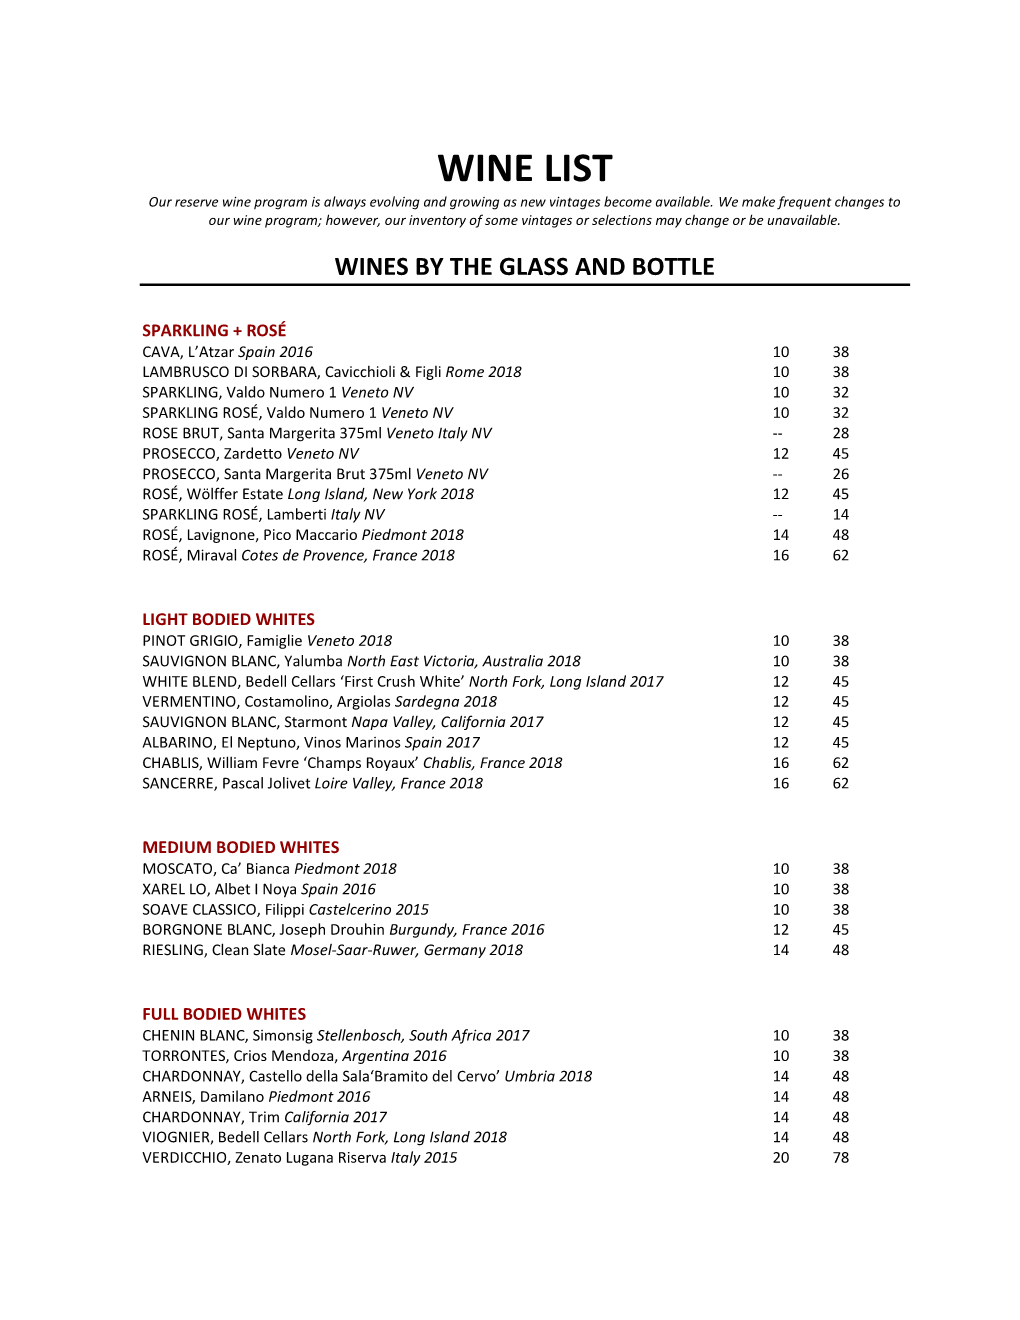 WINE LIST Our Reserve Wine Program Is Always Evolving and Growing As New Vintages Become Available